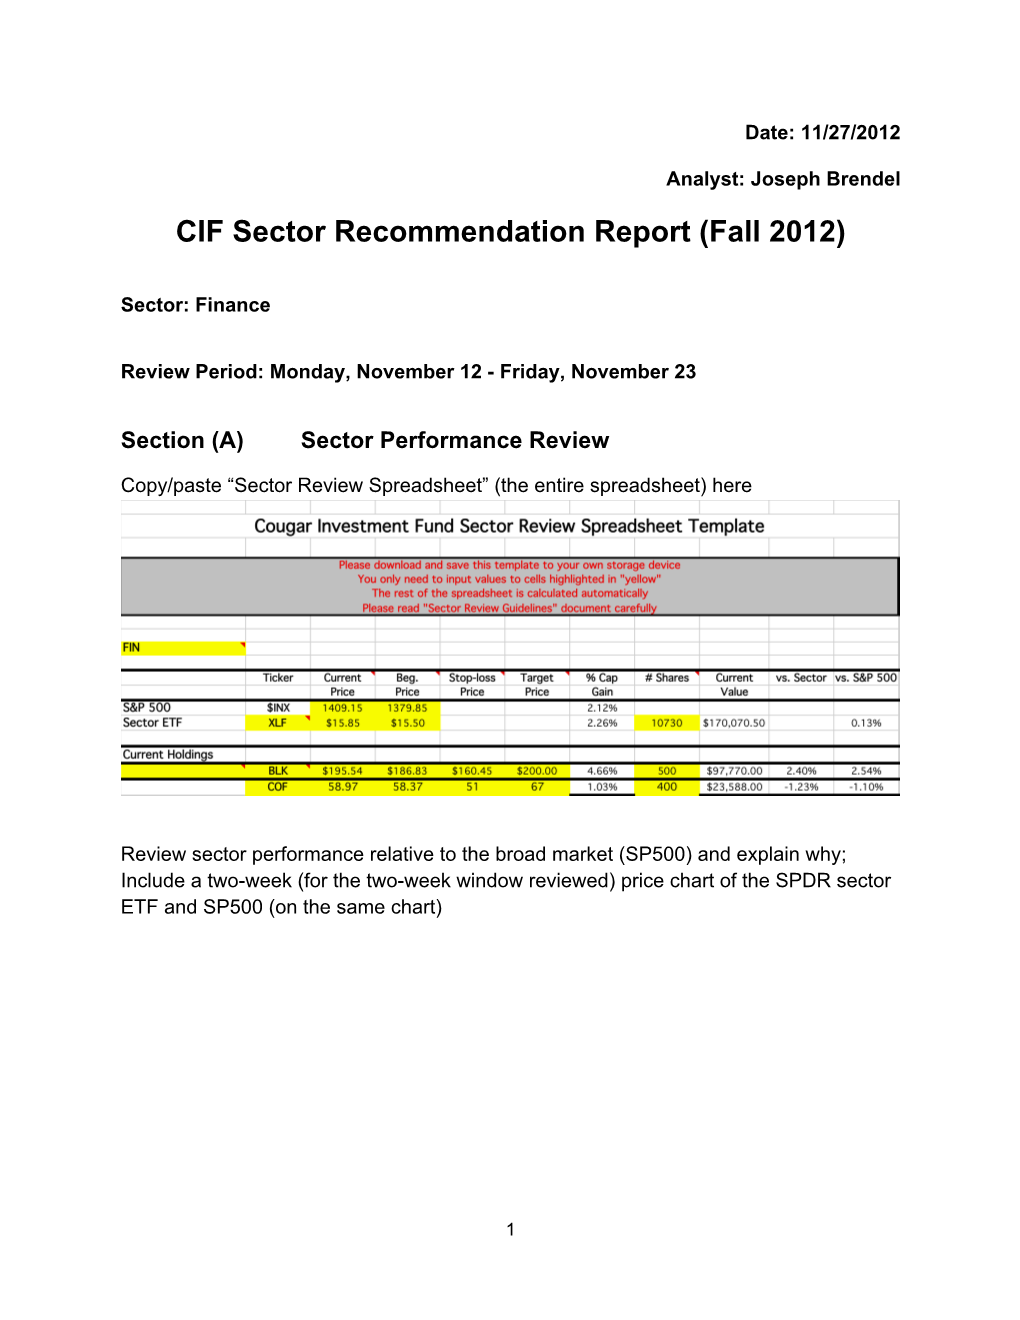 CIF Sector Recommendation Report (Fall 2012)